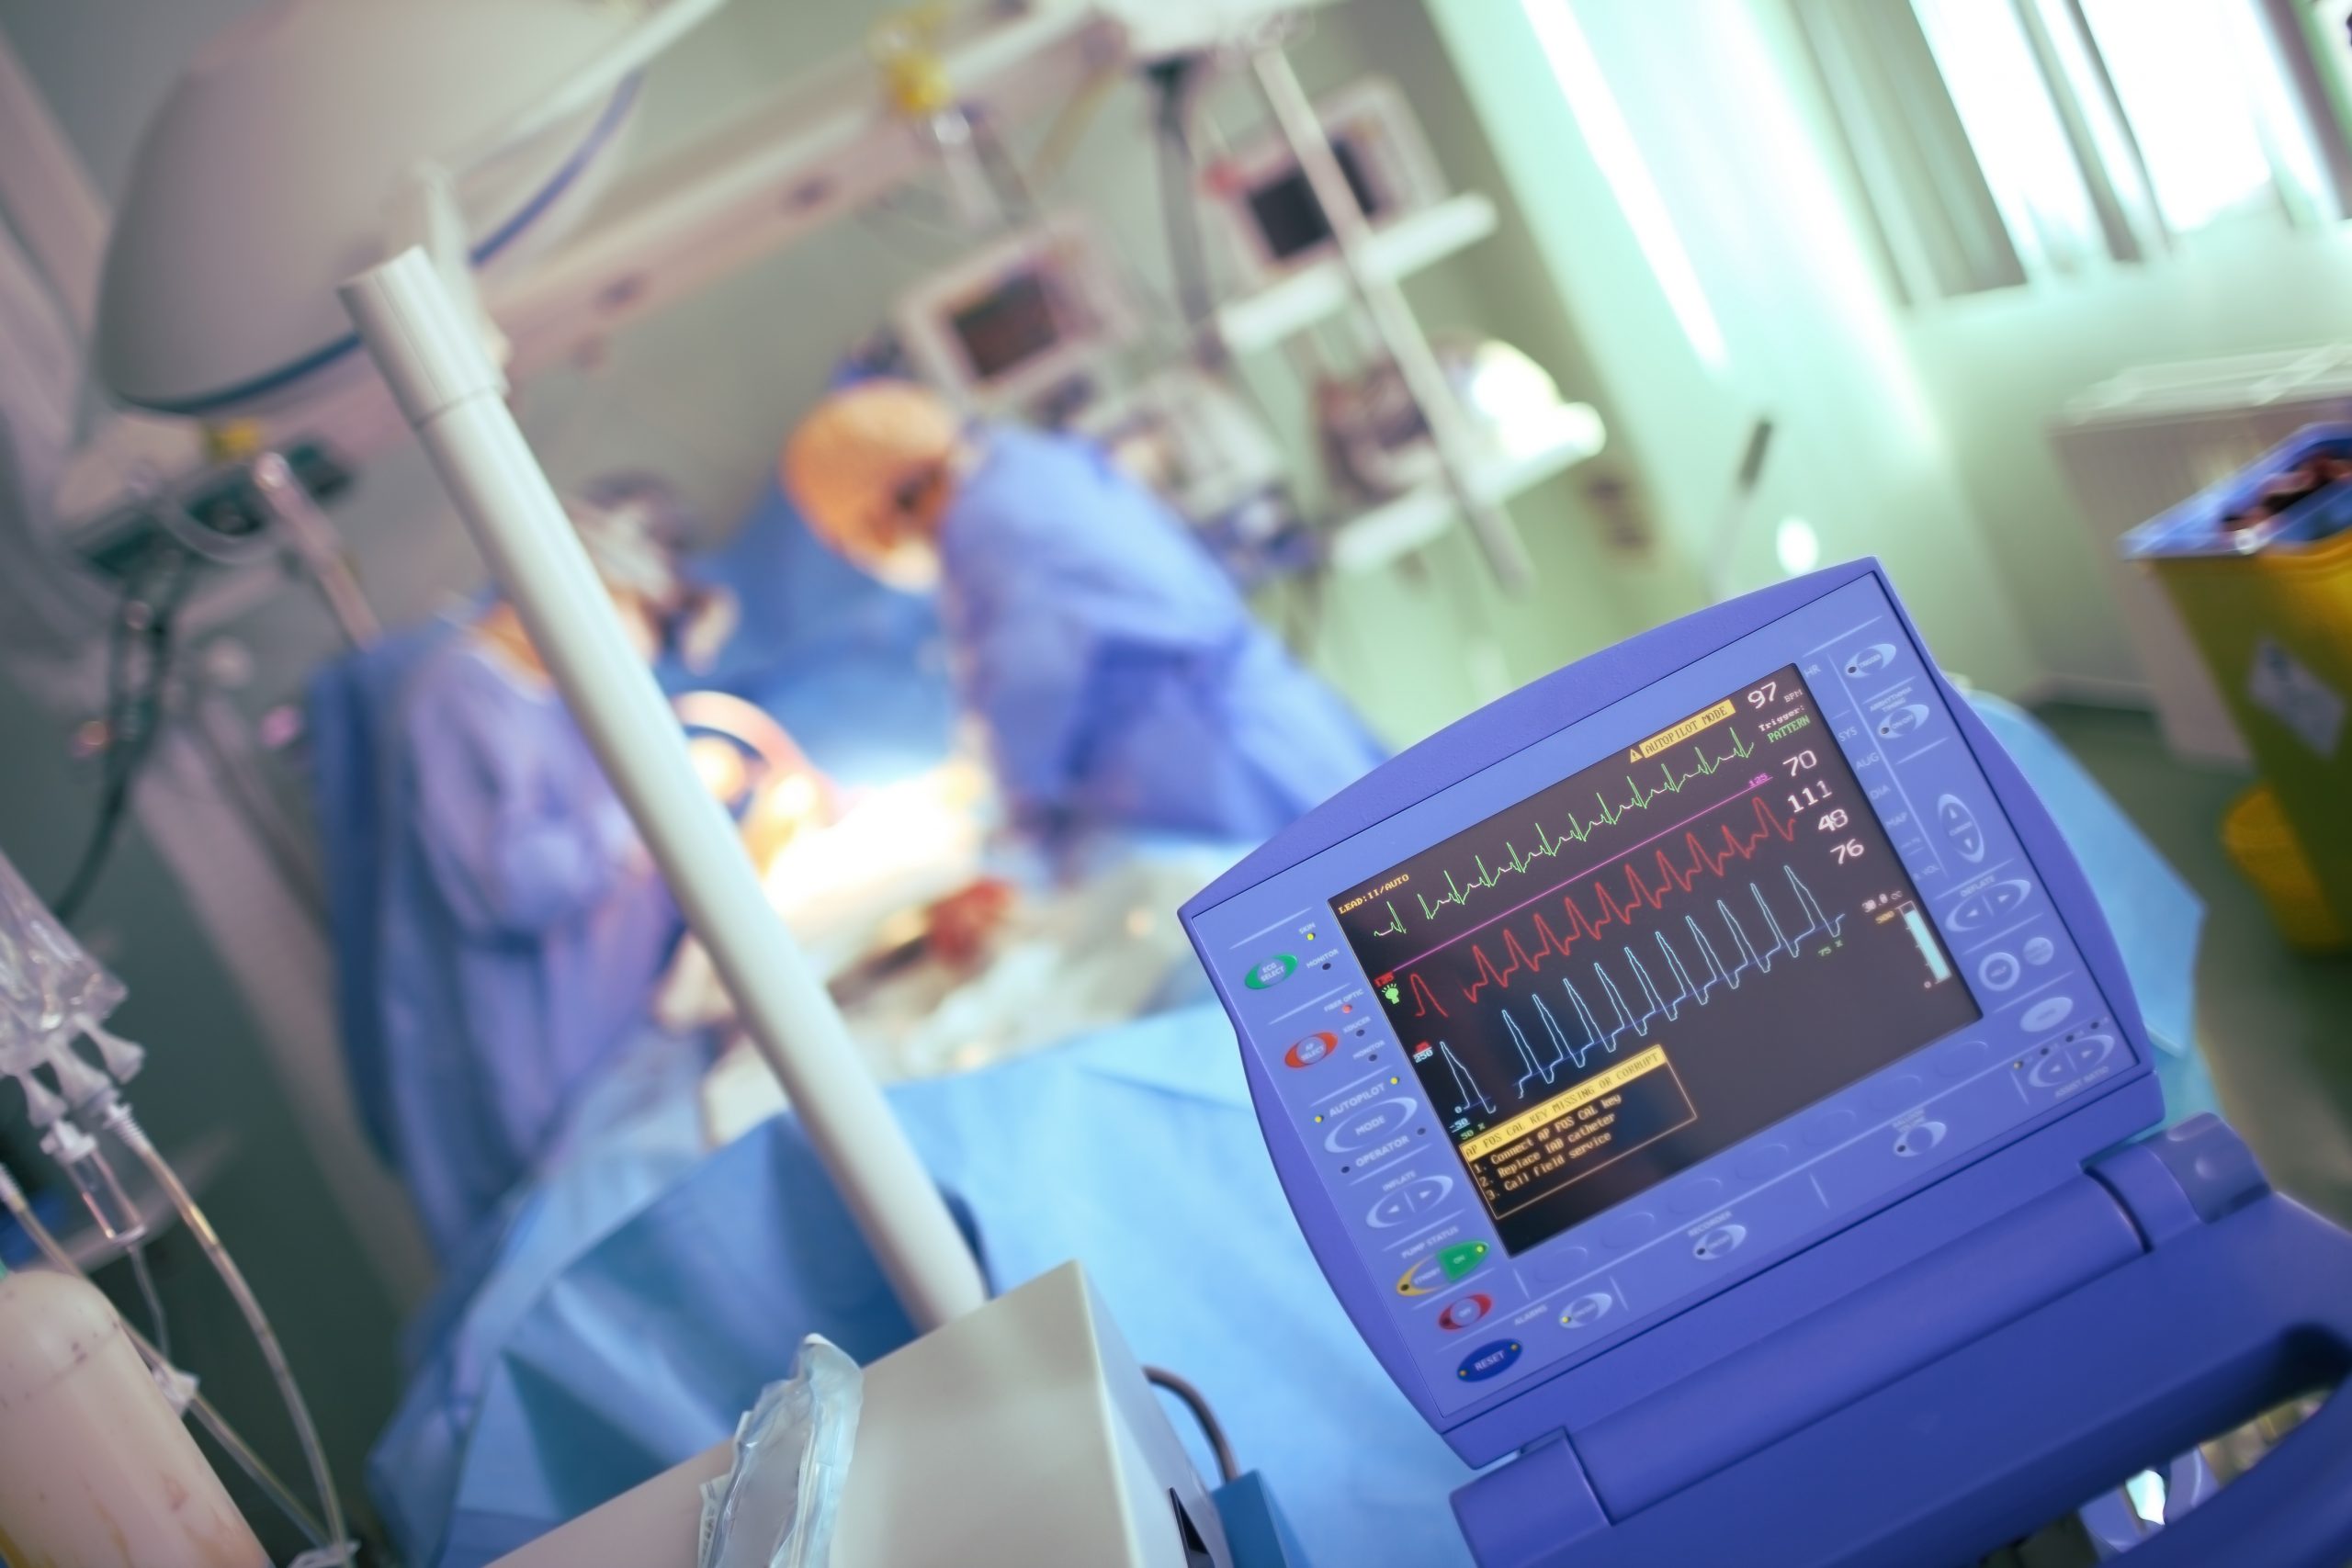 Monitoring of heart function during medical procedure